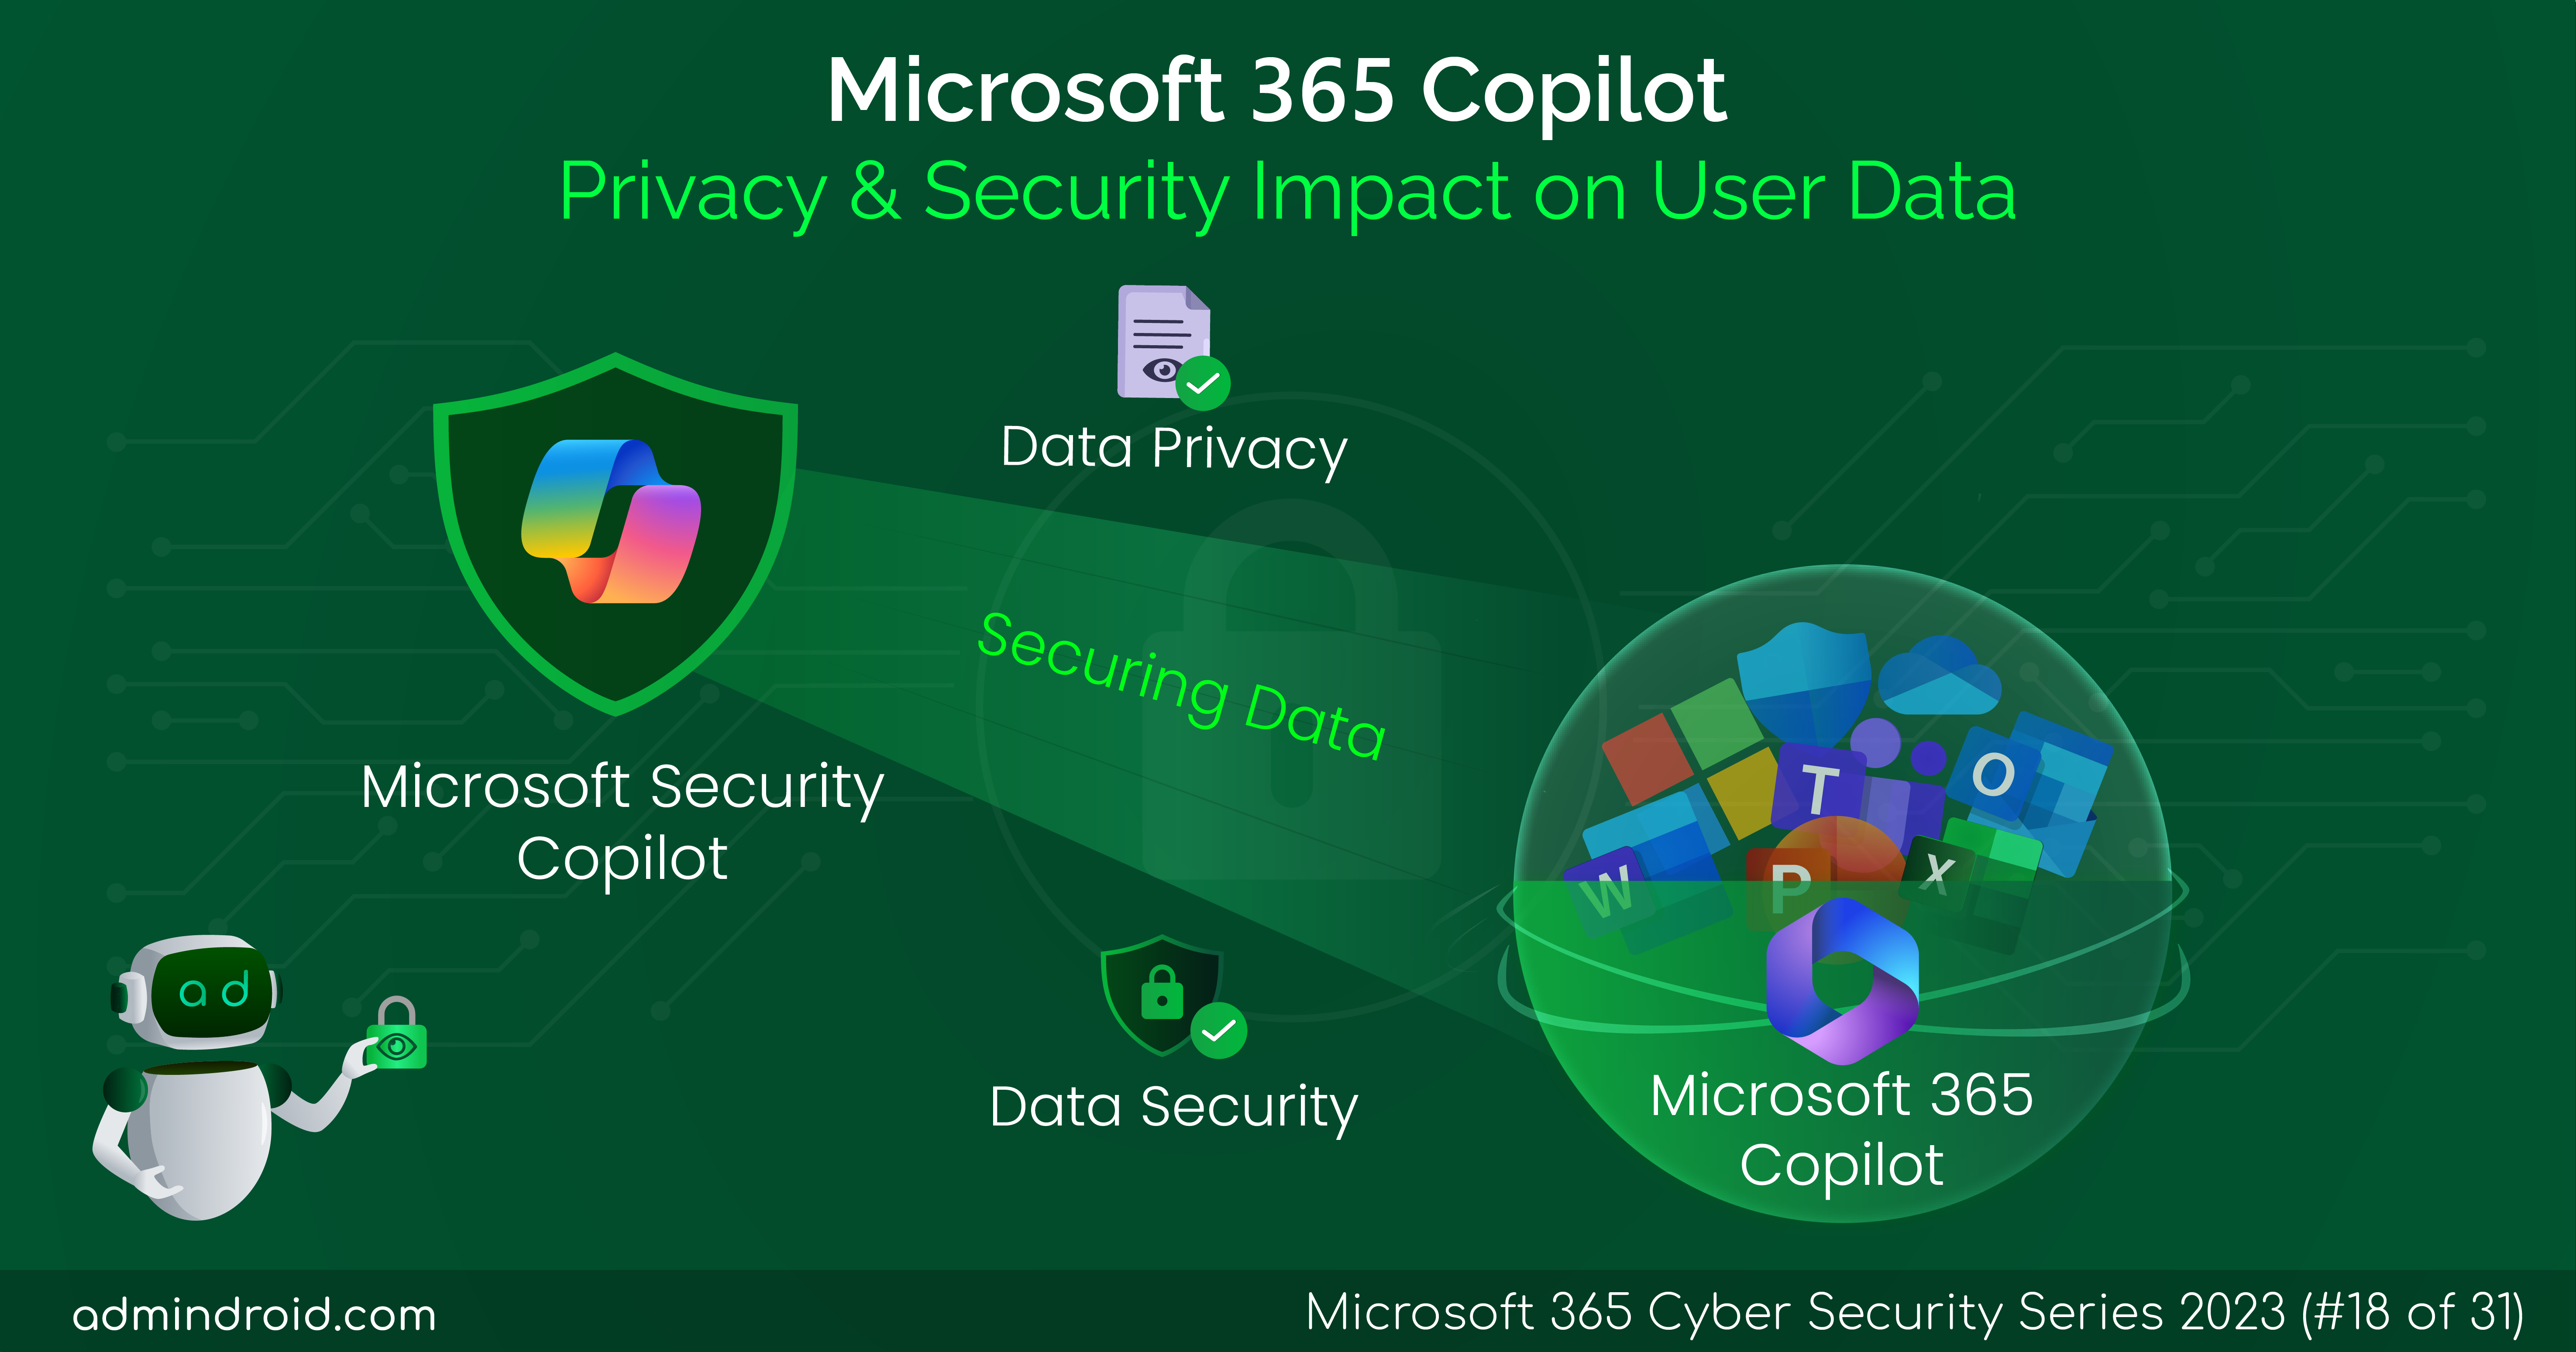 Microsoft 365 Copilot - Privacy & Security Impact on User Data